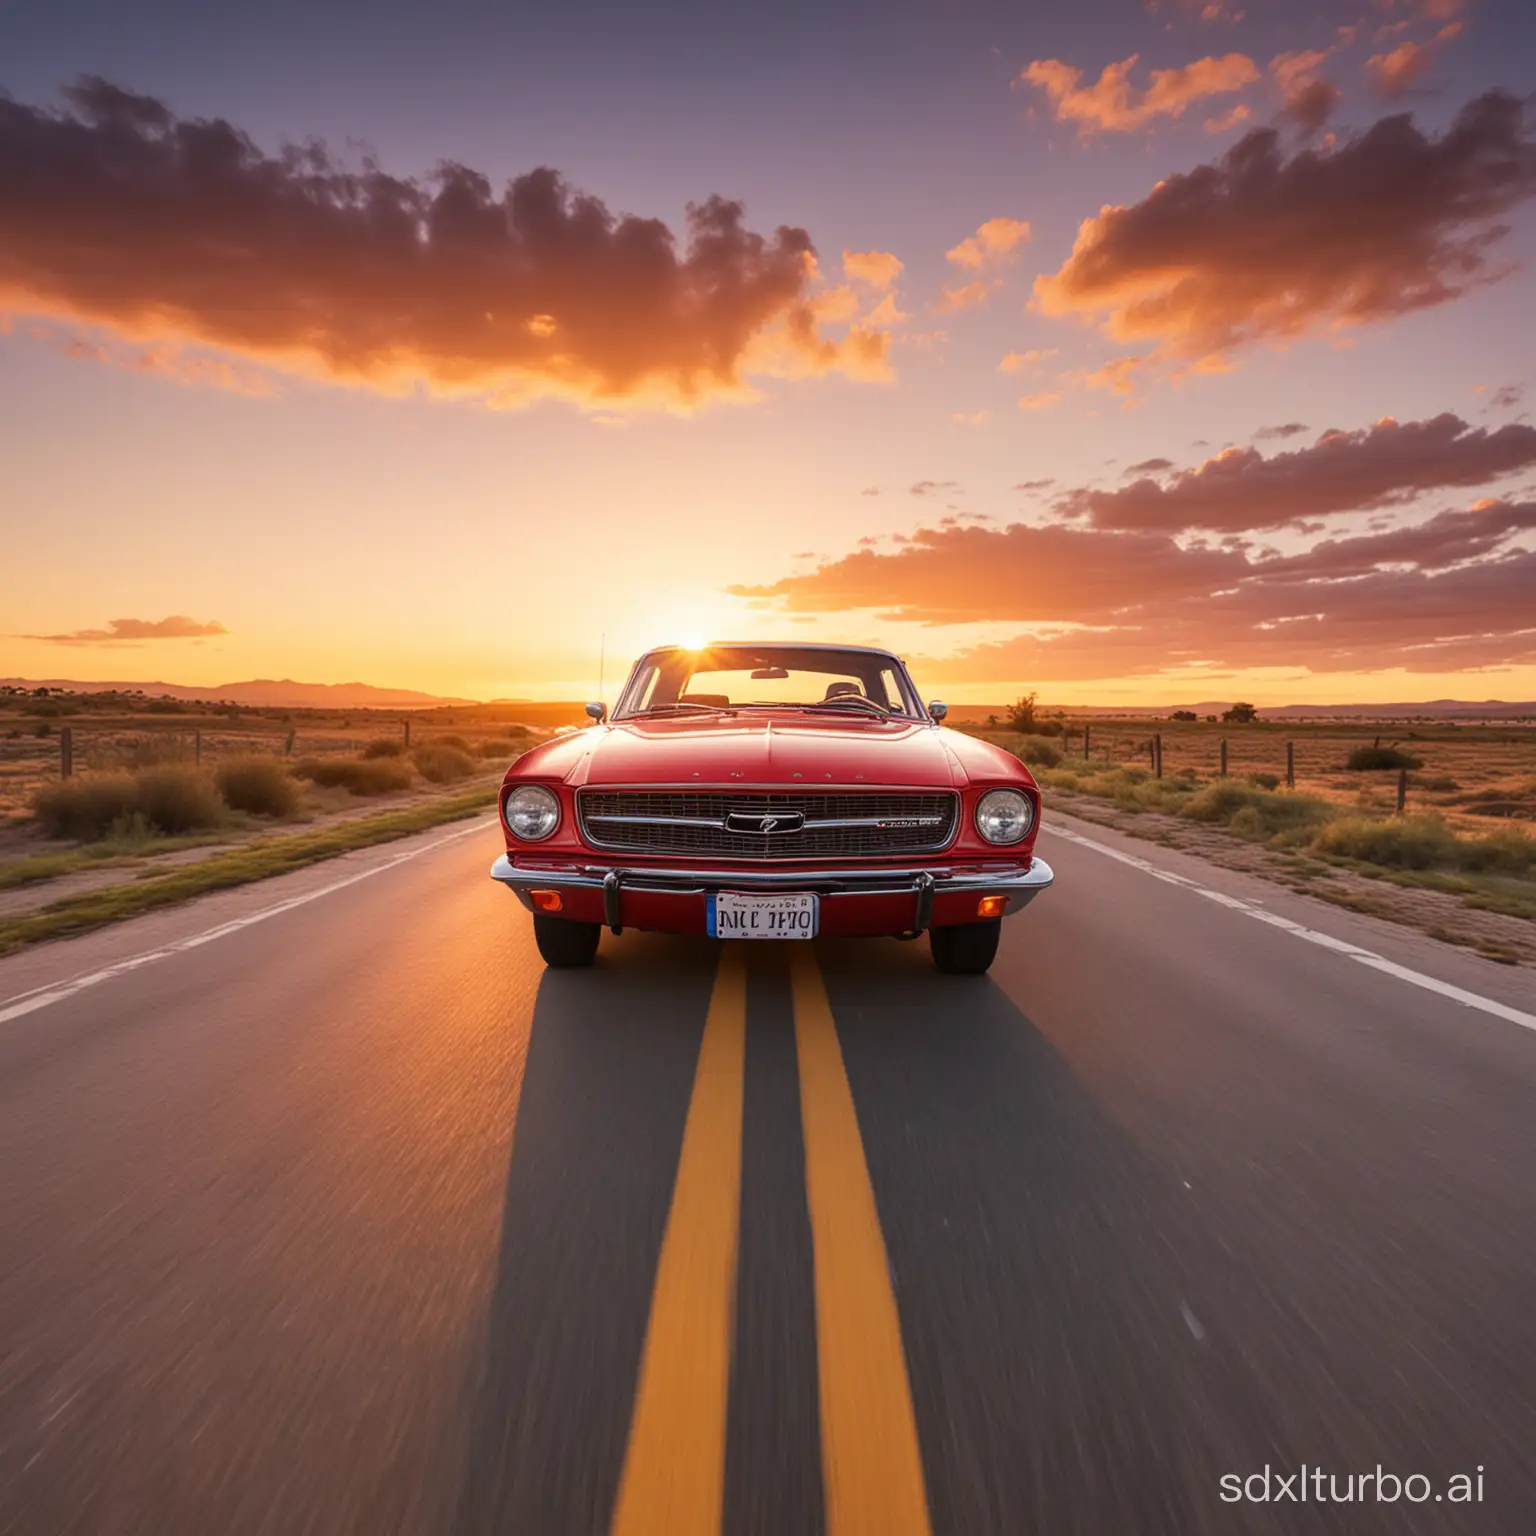 Red-Car-Approaching-at-Sunrise